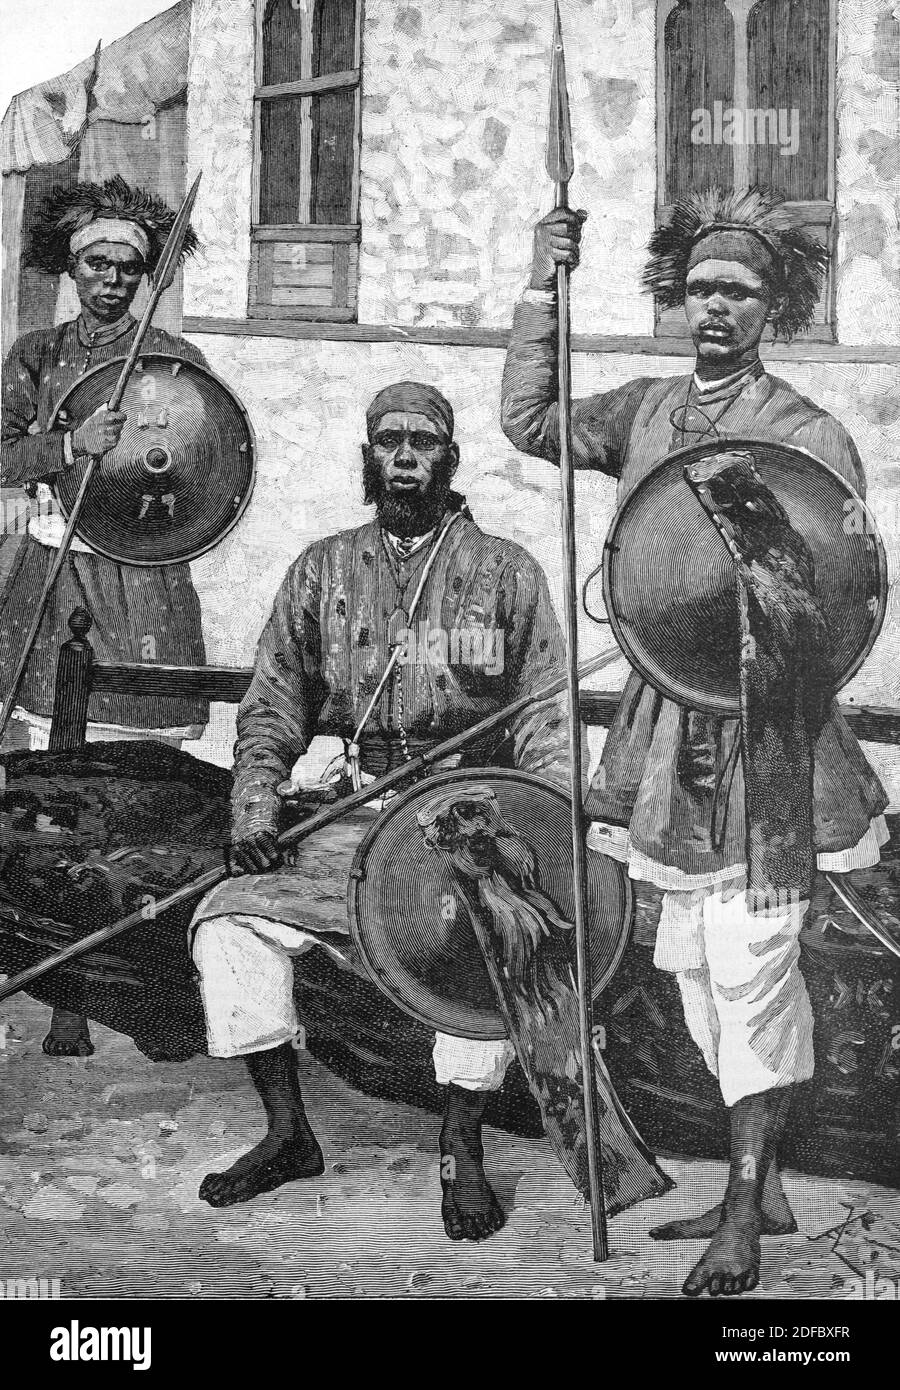 Abyssinian Soldiers or Troops Holding Spears & Shields of Ethiopian Emperor Menelik II (Engr 1895) Vintage Engraving or Illustration Stock Photo